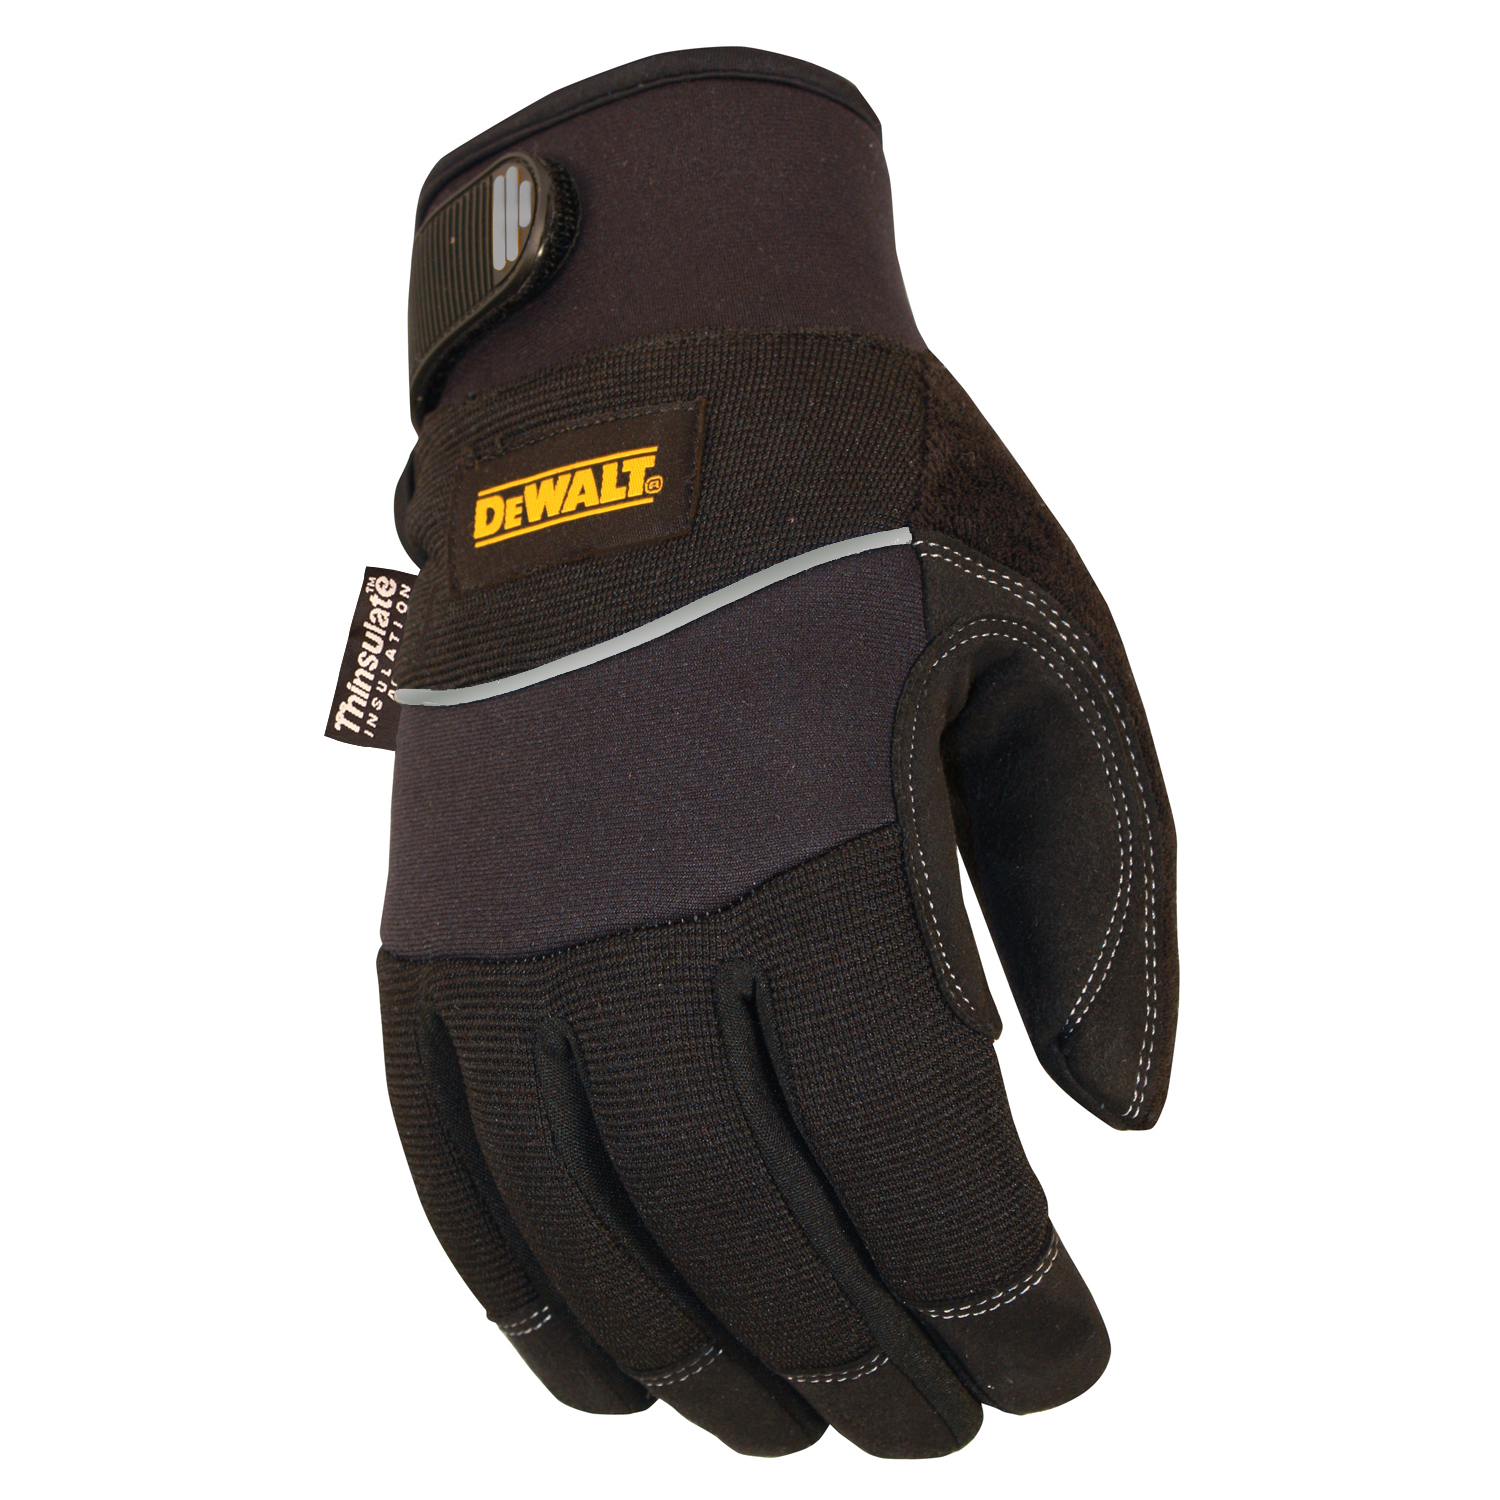 DPG755 Insulated Harsh Condition Work Glove - Size L - Utility Gloves